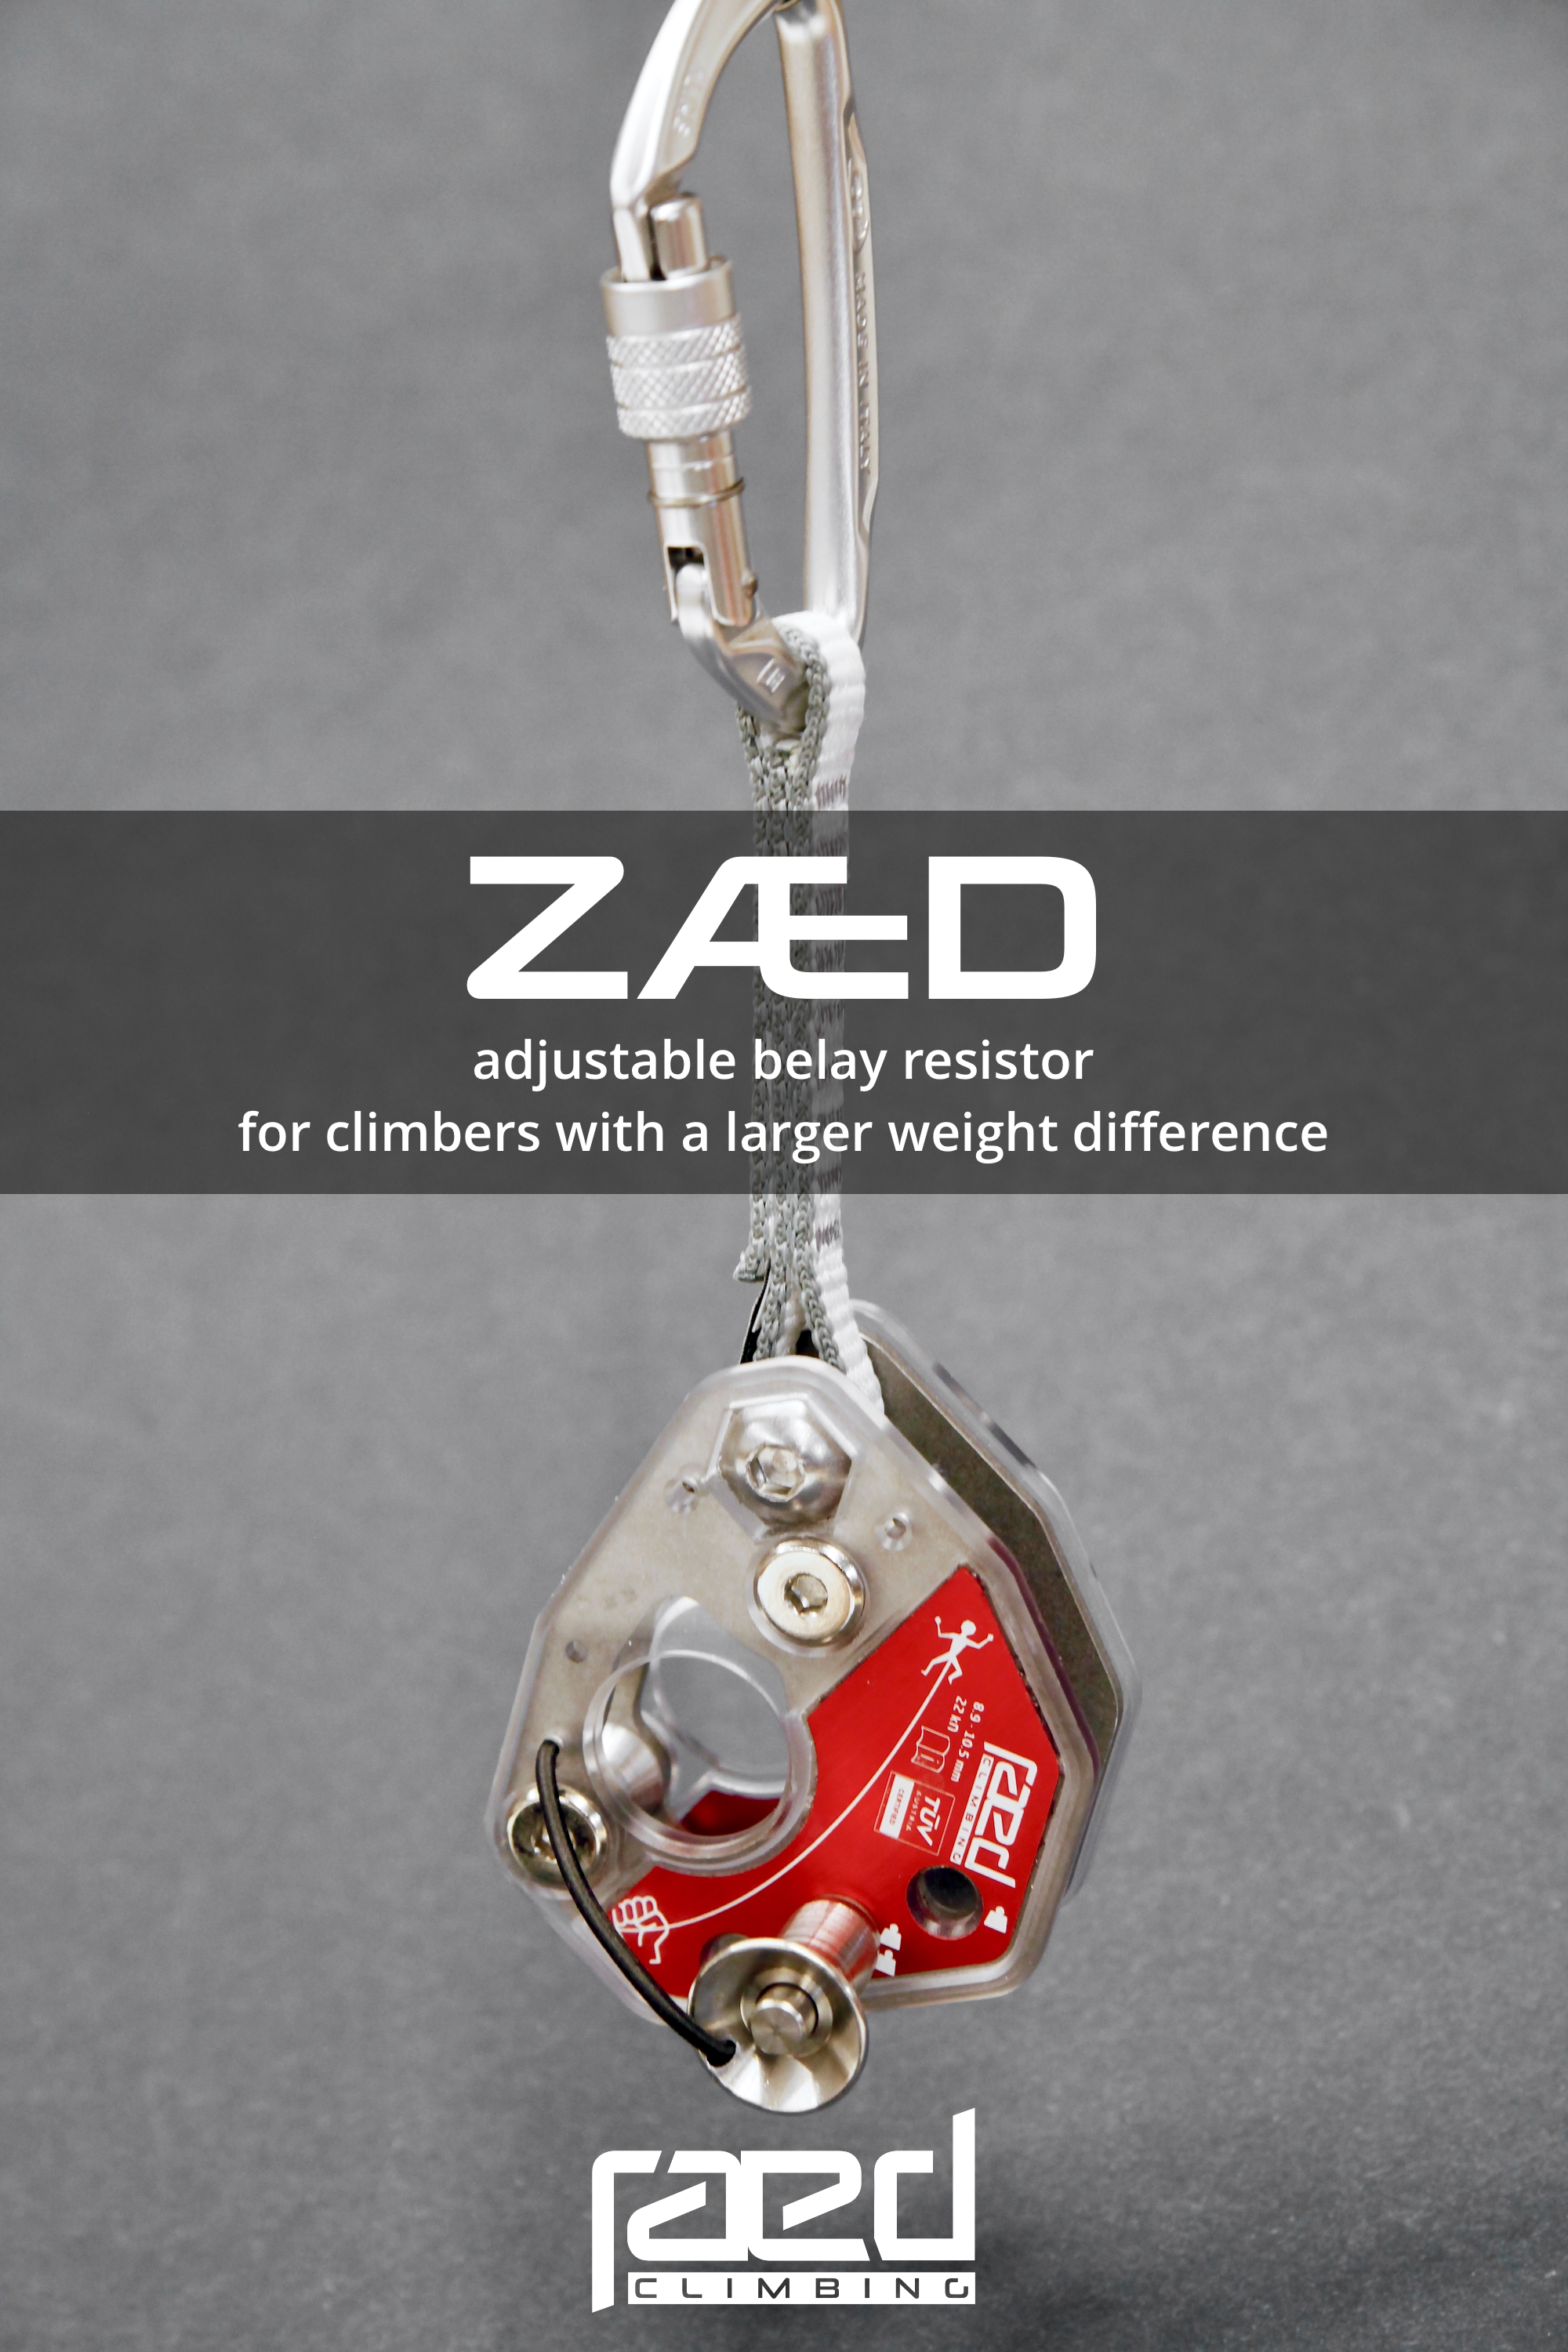 raed releases ZAED, a revolutionary belay device for sports climbers with a larger weight difference to their belayer